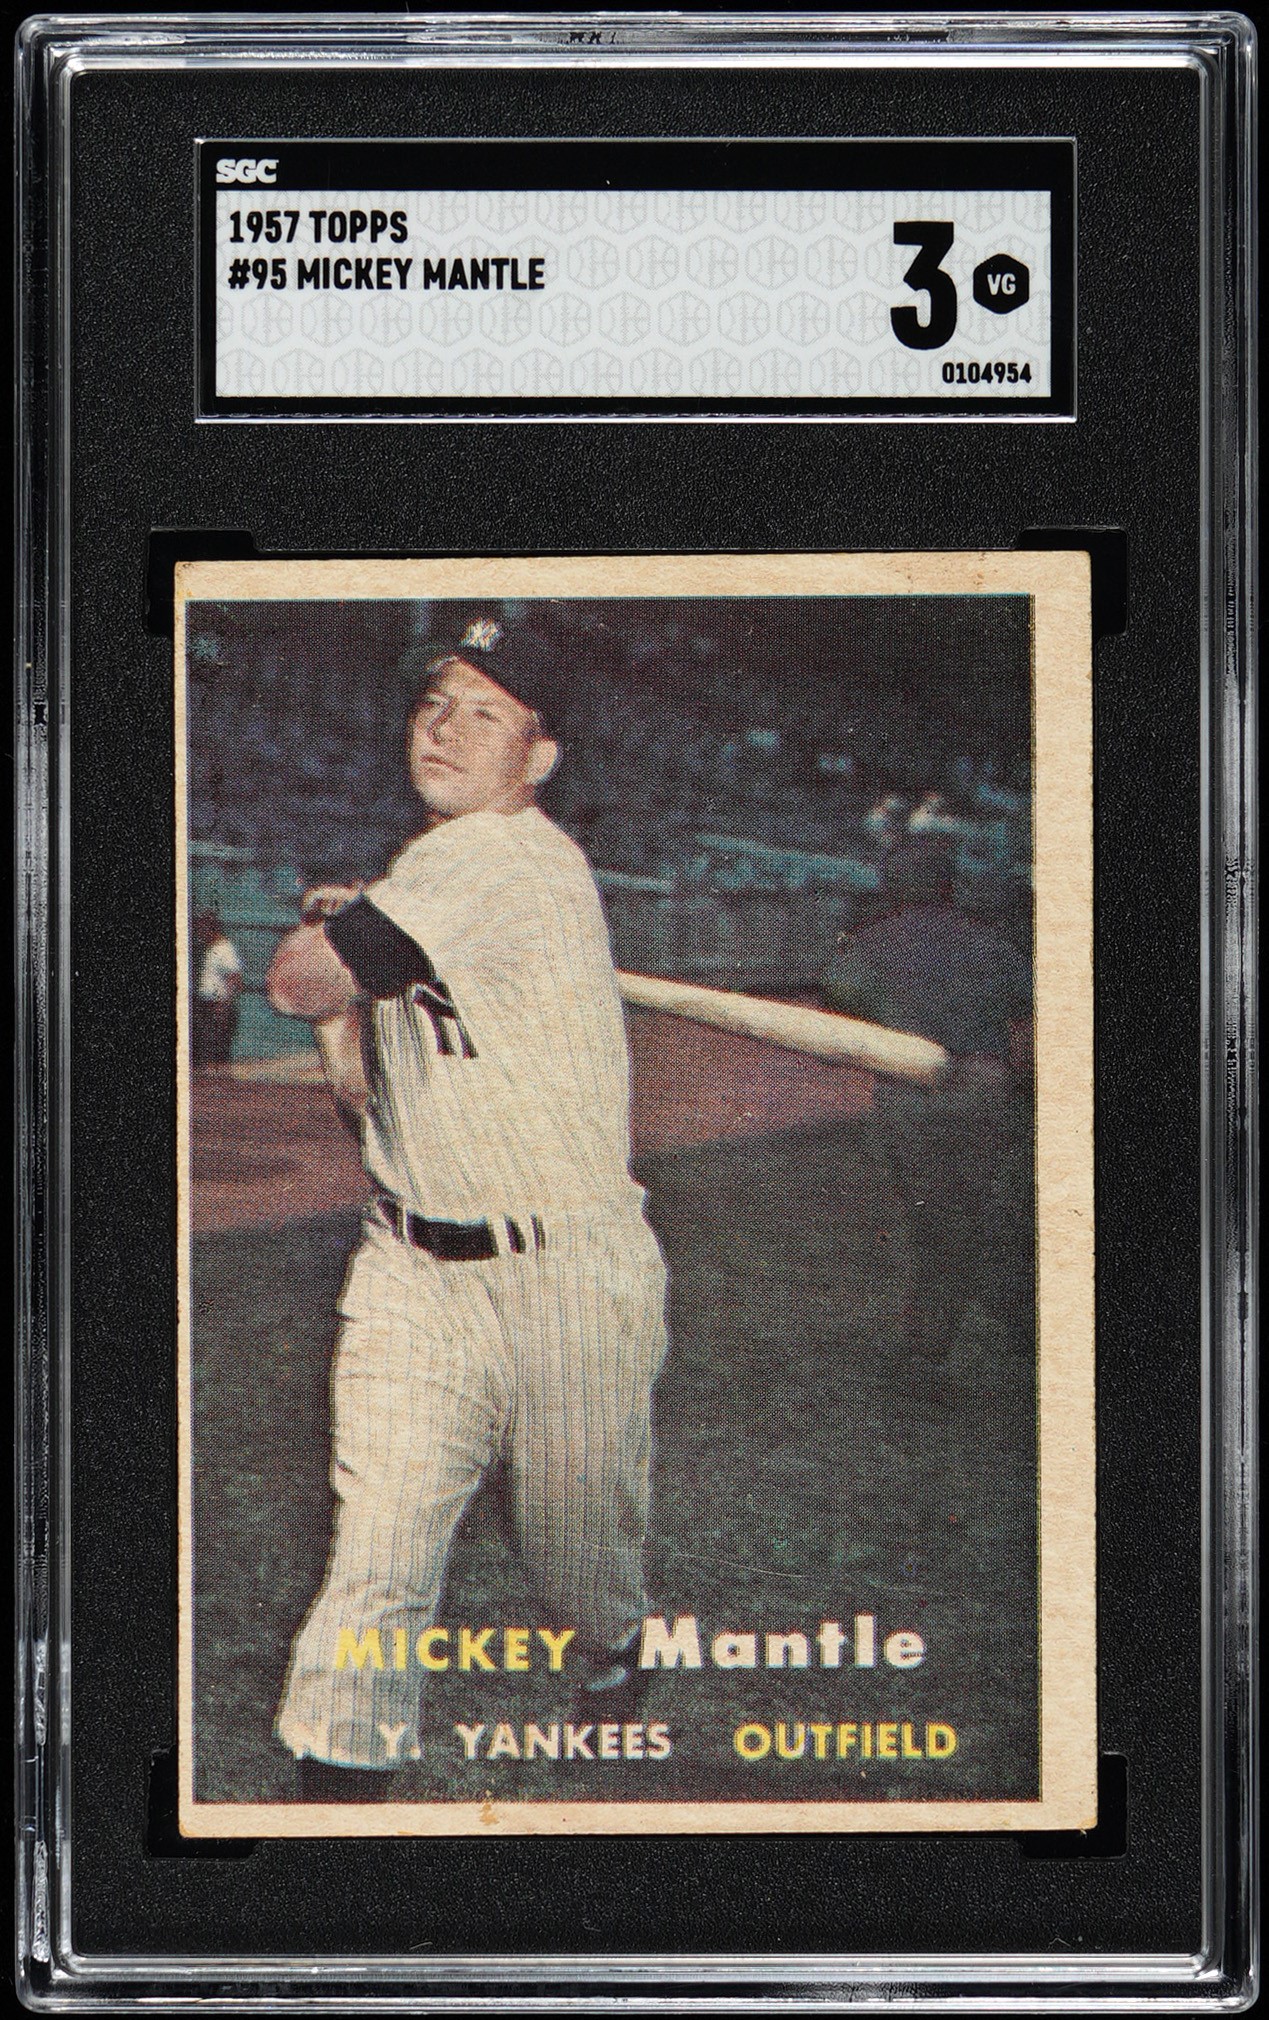 1957 Topps #95 Mickey Mantle SGC VG 3